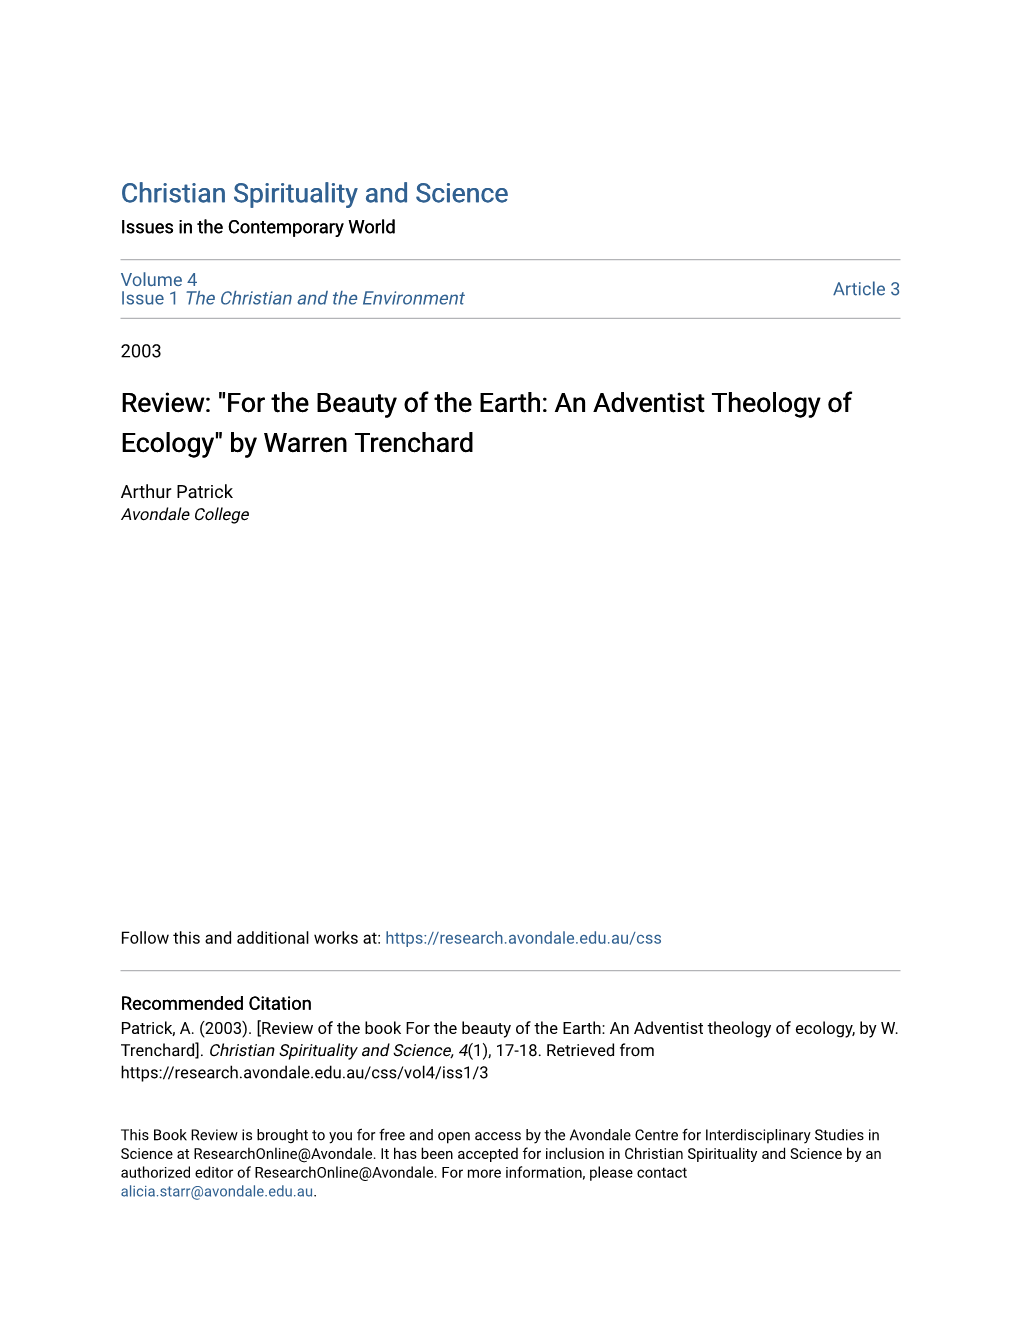 Review: "For the Beauty of the Earth: an Adventist Theology of Ecology" by Warren Trenchard